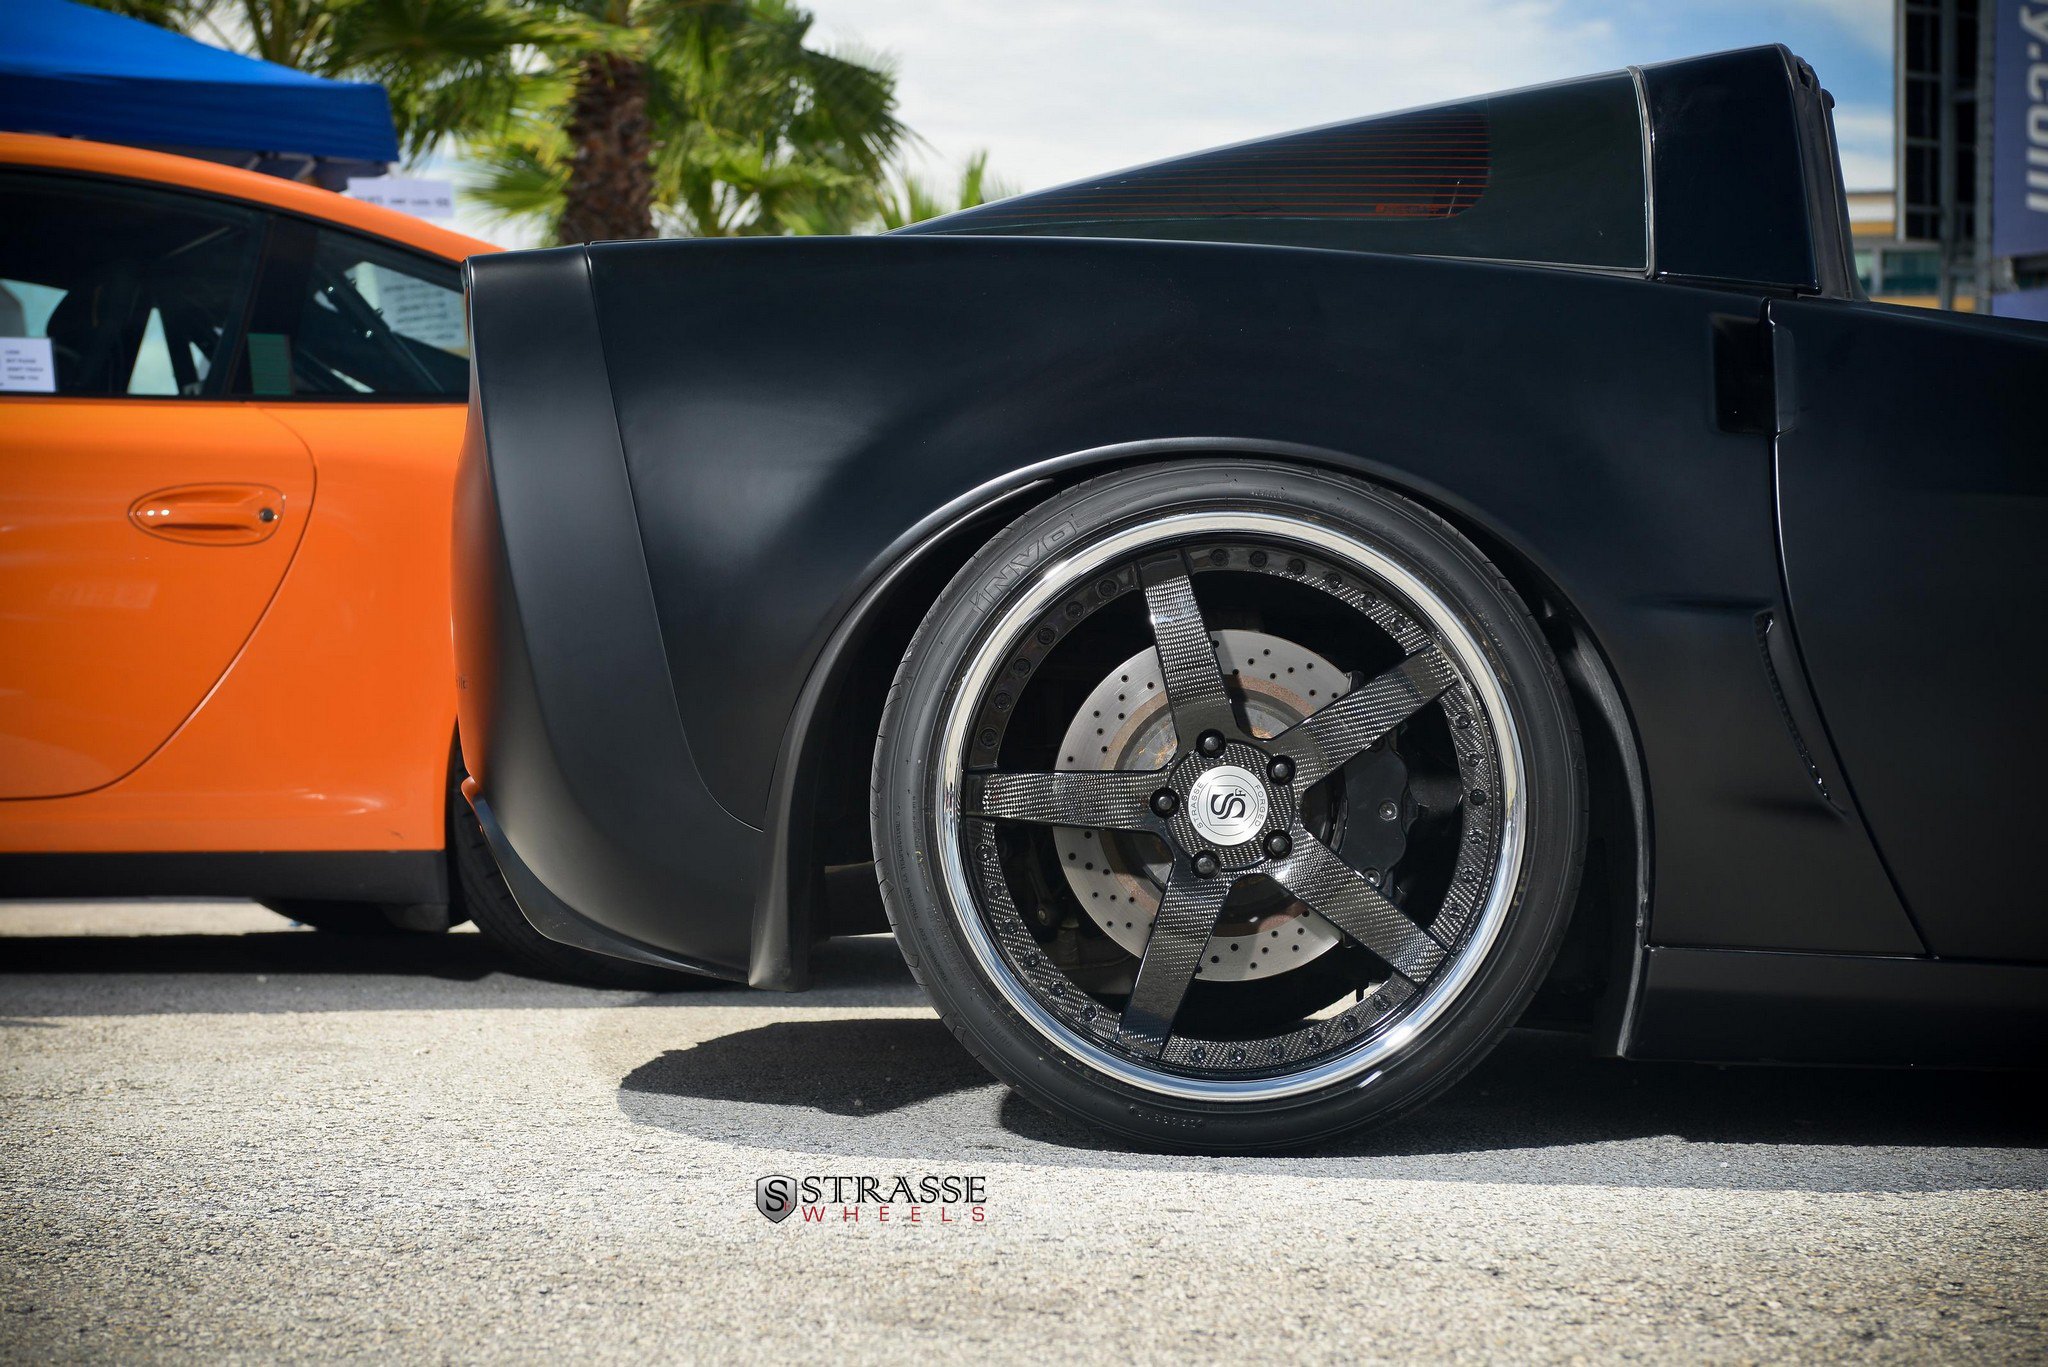 Carbon Fiber Strasse Rims on Gray Matte Chevy Corvette - Photo by Strasse Forged